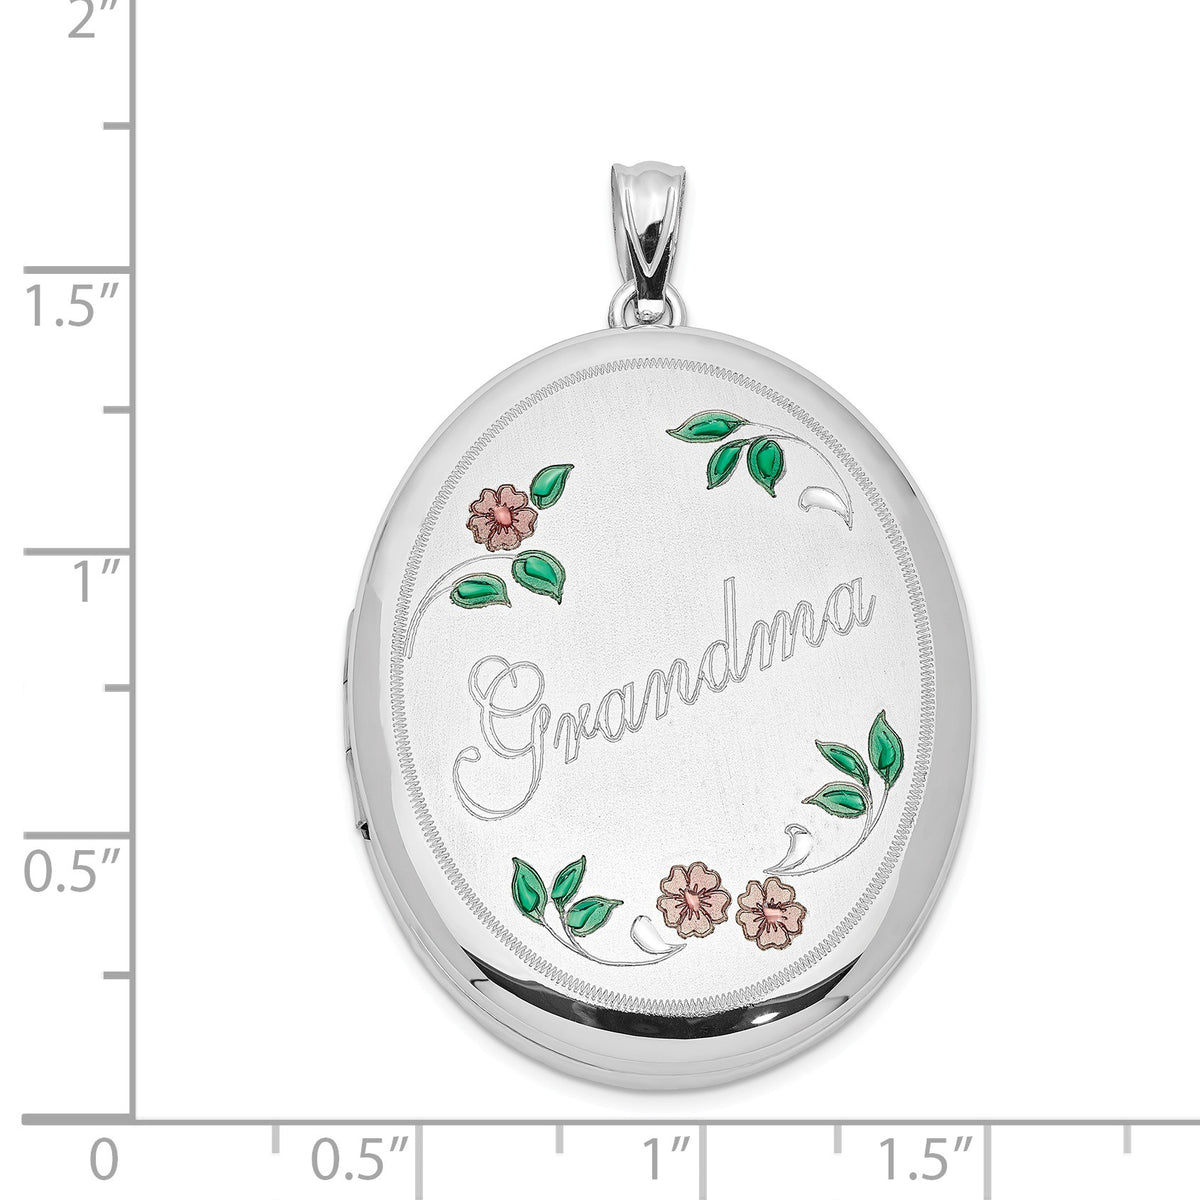 Alternate view of the Sterling Silver and Enamel 34mm Grandma Oval Locket by The Black Bow Jewelry Co.